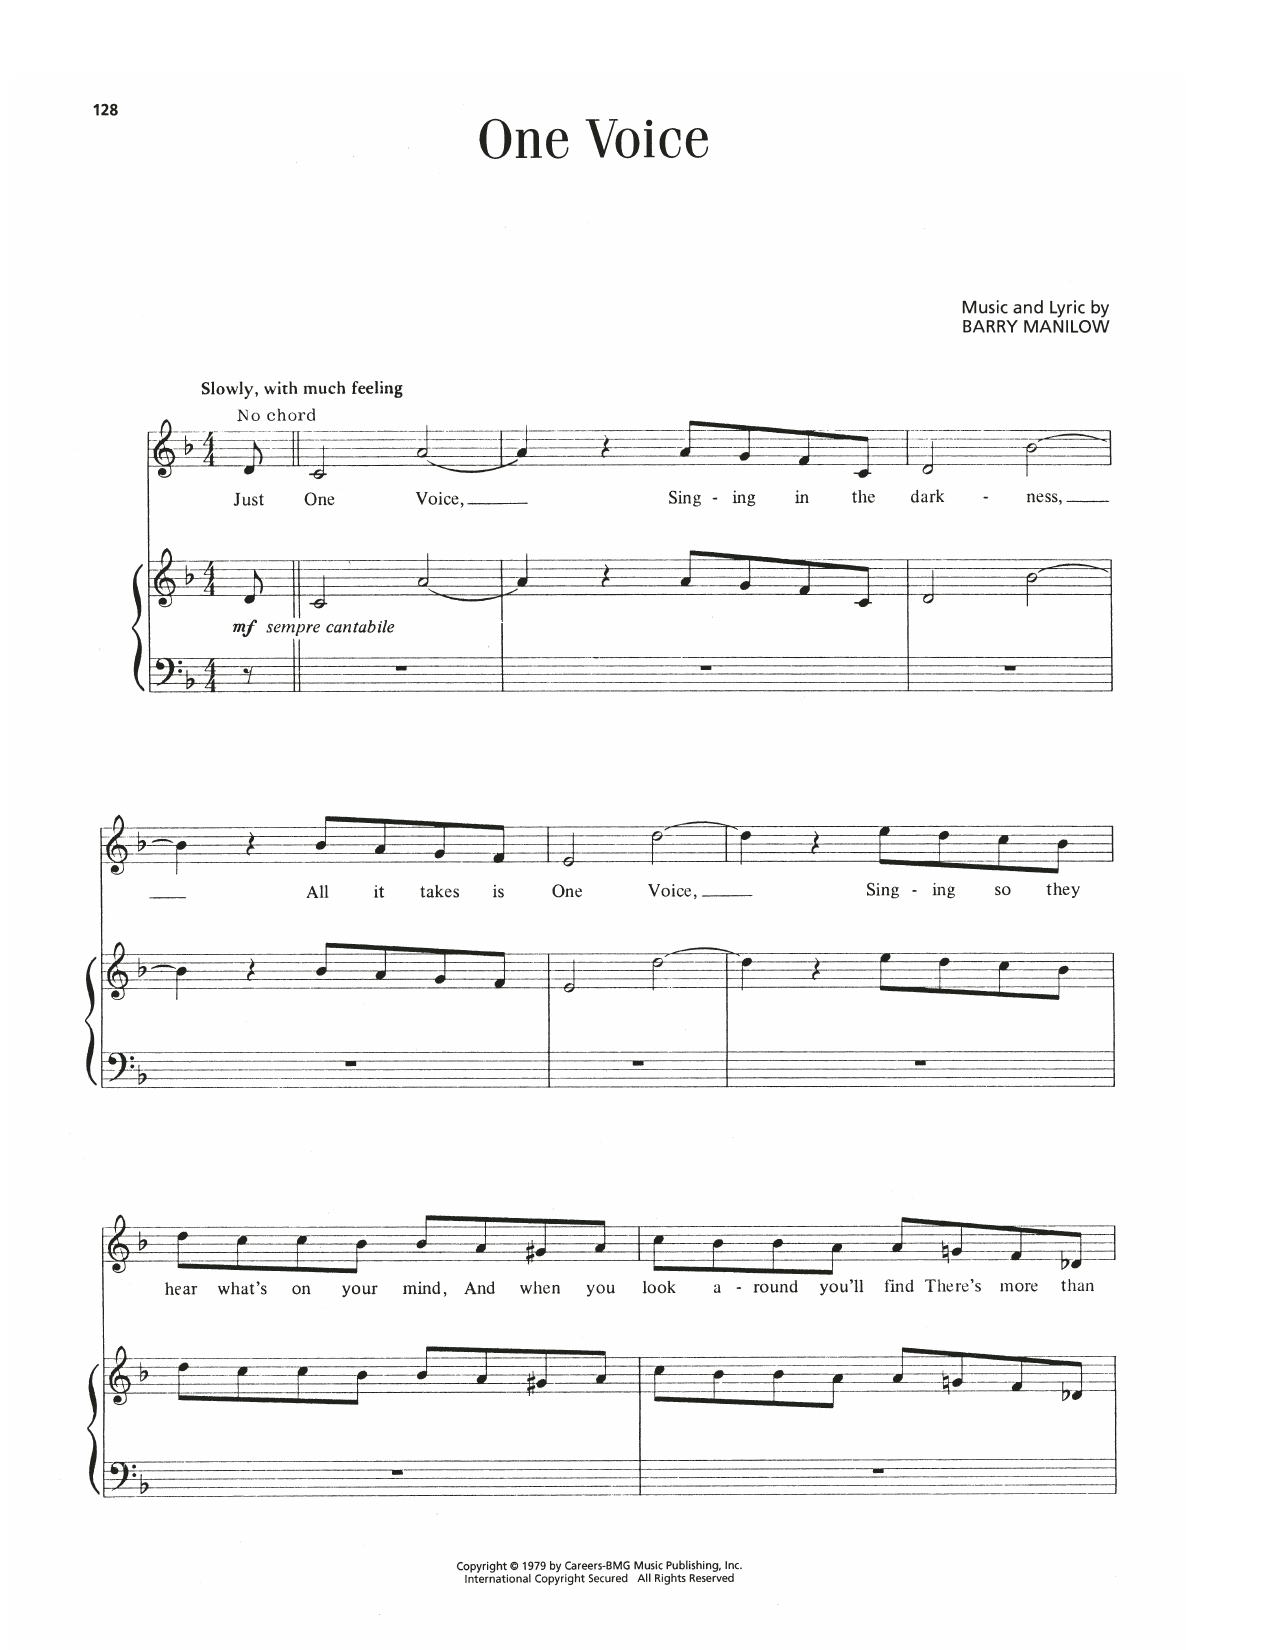 Download Barry Manilow One Voice Sheet Music